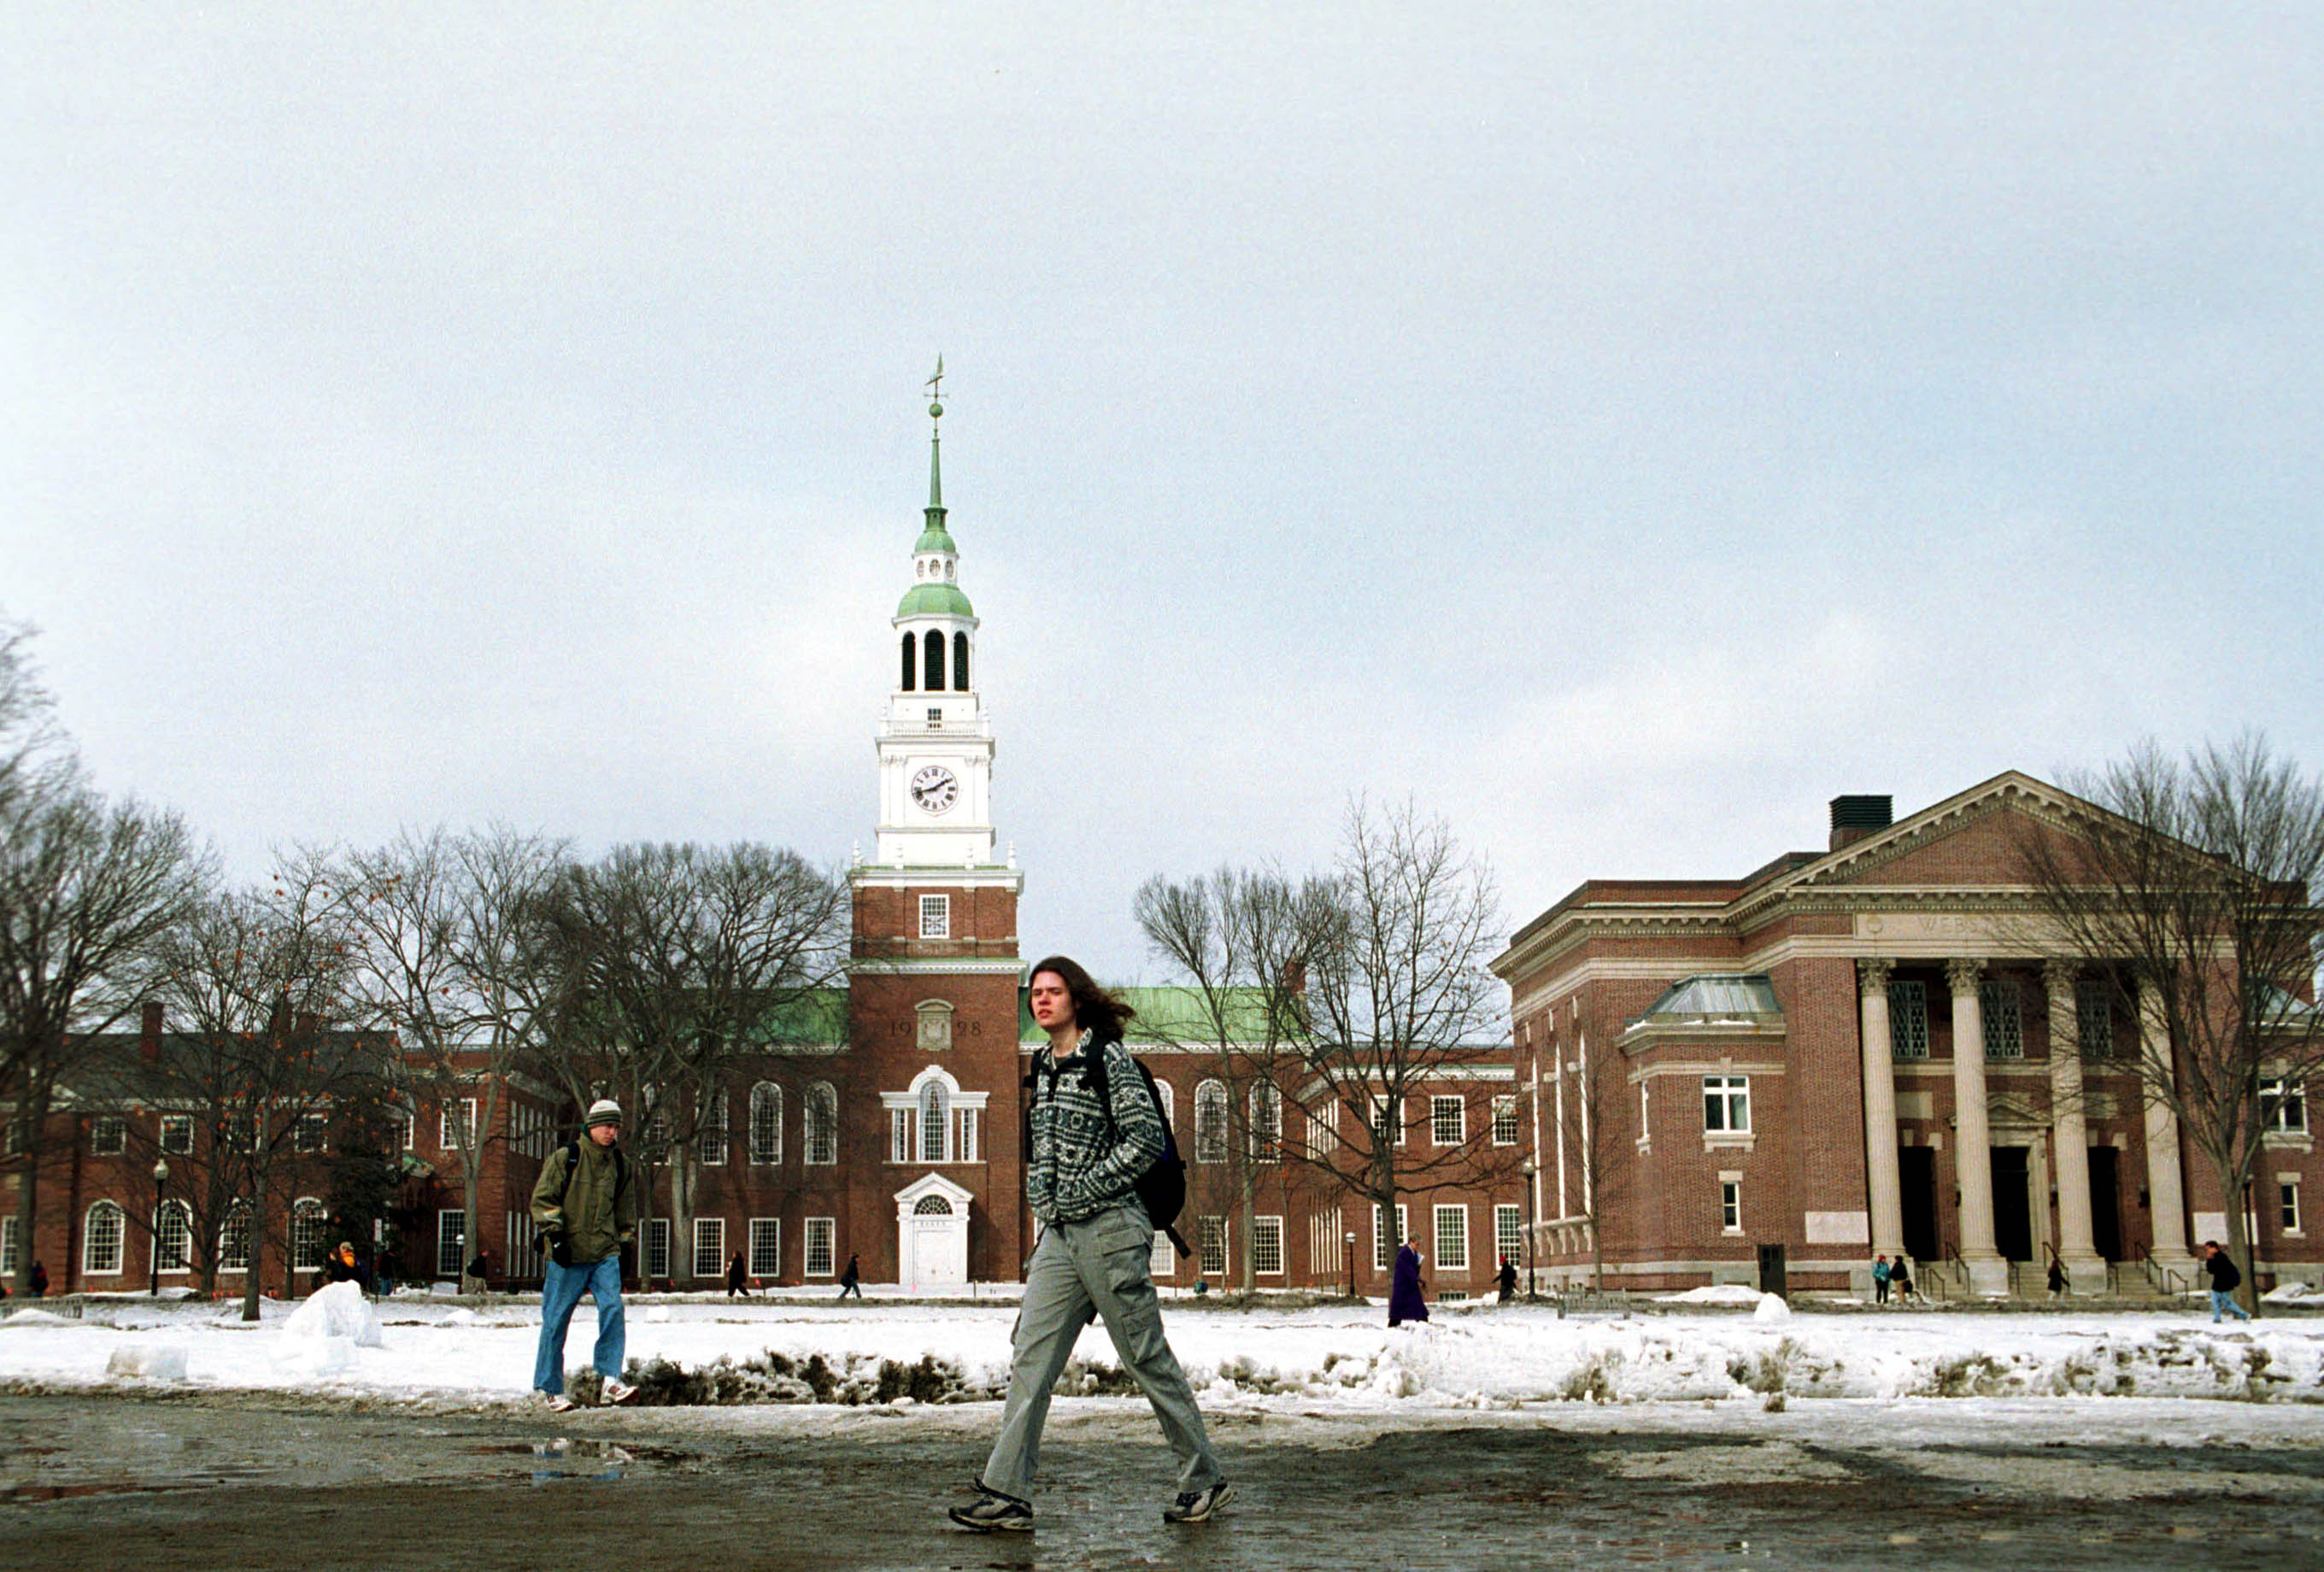 Dartmouth College student walks across the main campus February 28, 2001 in Hanover, NH. (Photo by Darren McCollester/Newsmakers) (Darren McCollester&mdash;Getty Images)